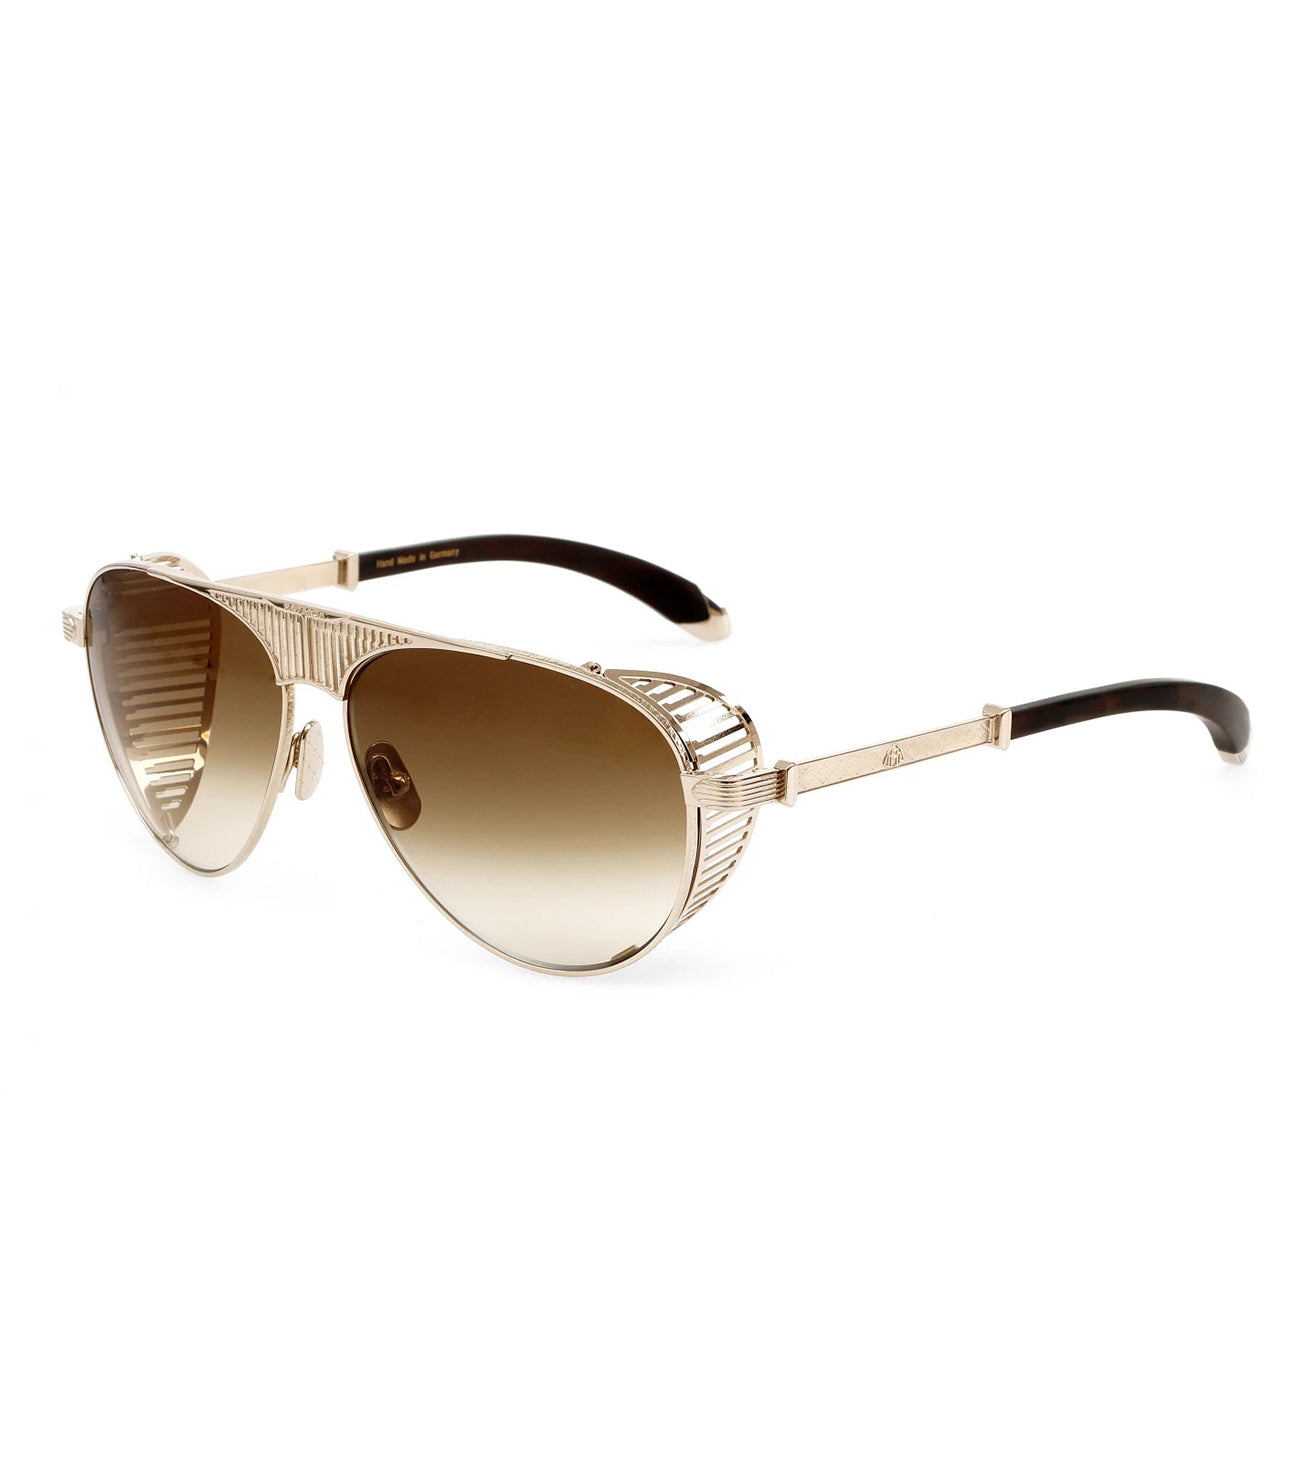 Maybach The Vision - I Unisex Brown Aviator Sunglasses